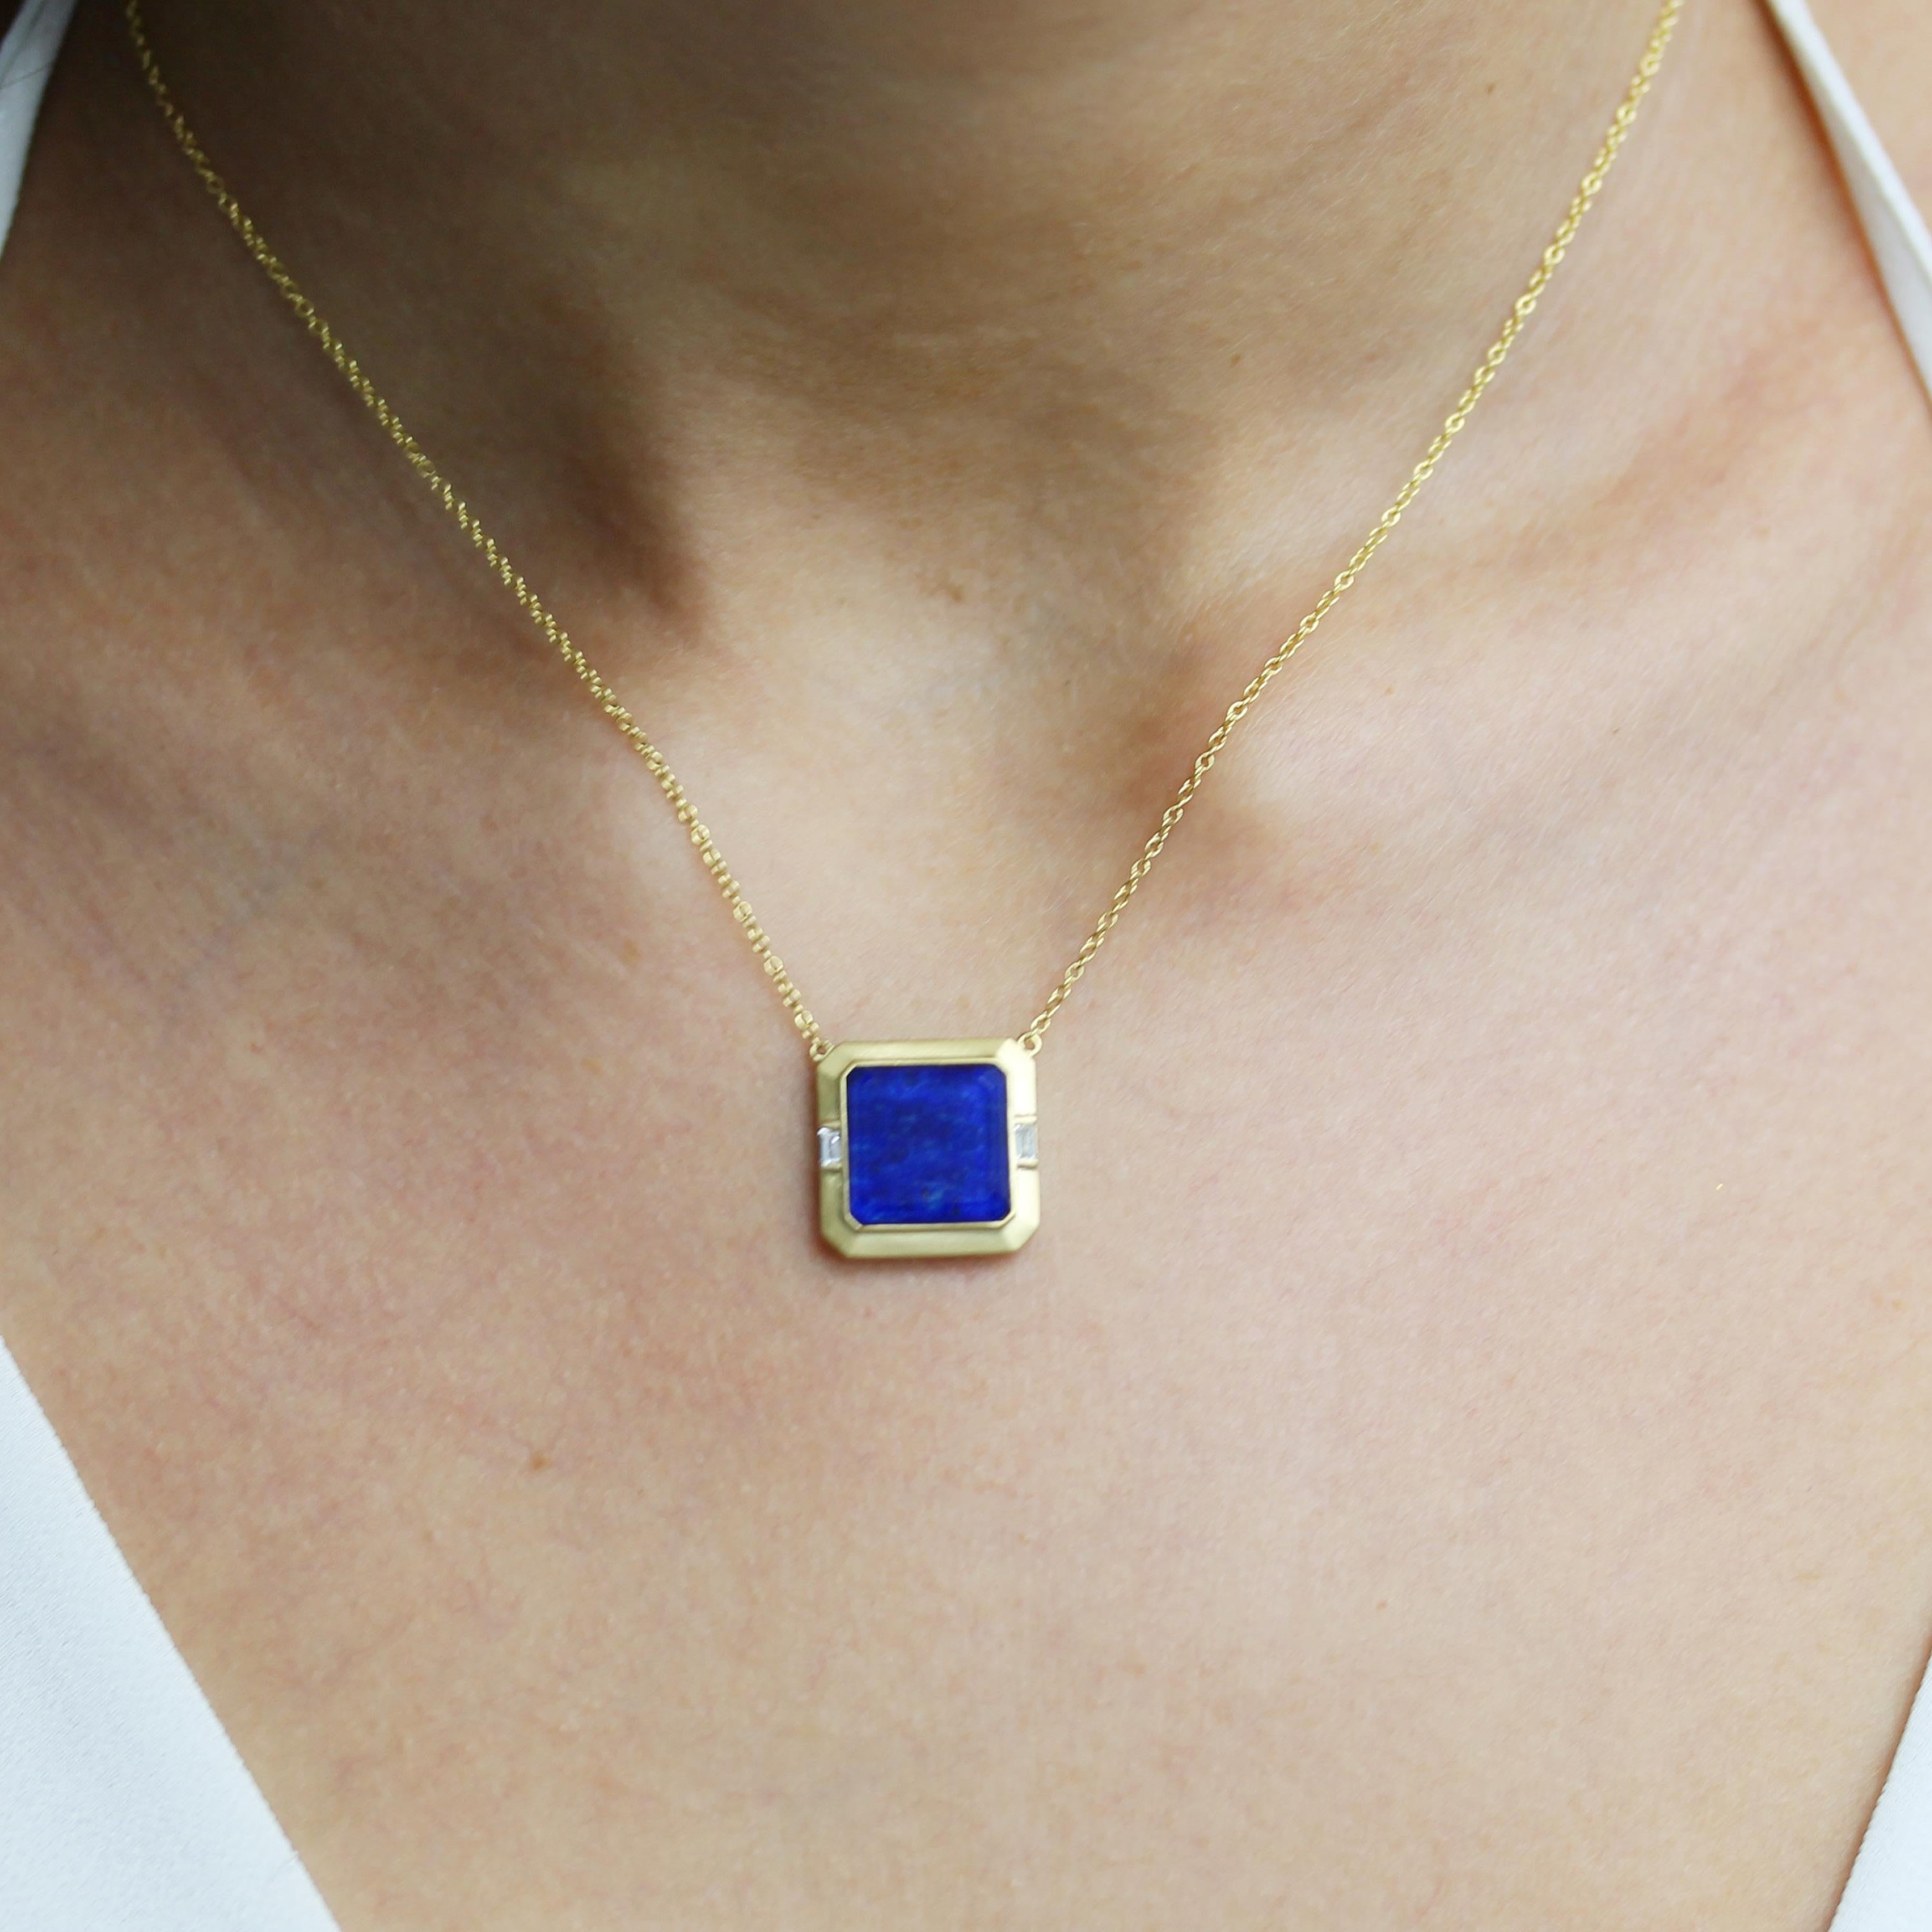 Royal Lapis Necklace featuring square, table-cut, White Quartz layered with Natural Lapis Lazuli, accented by a Baguette Diamonds, set in 18K matte/satin finish yellow gold. 18K 18